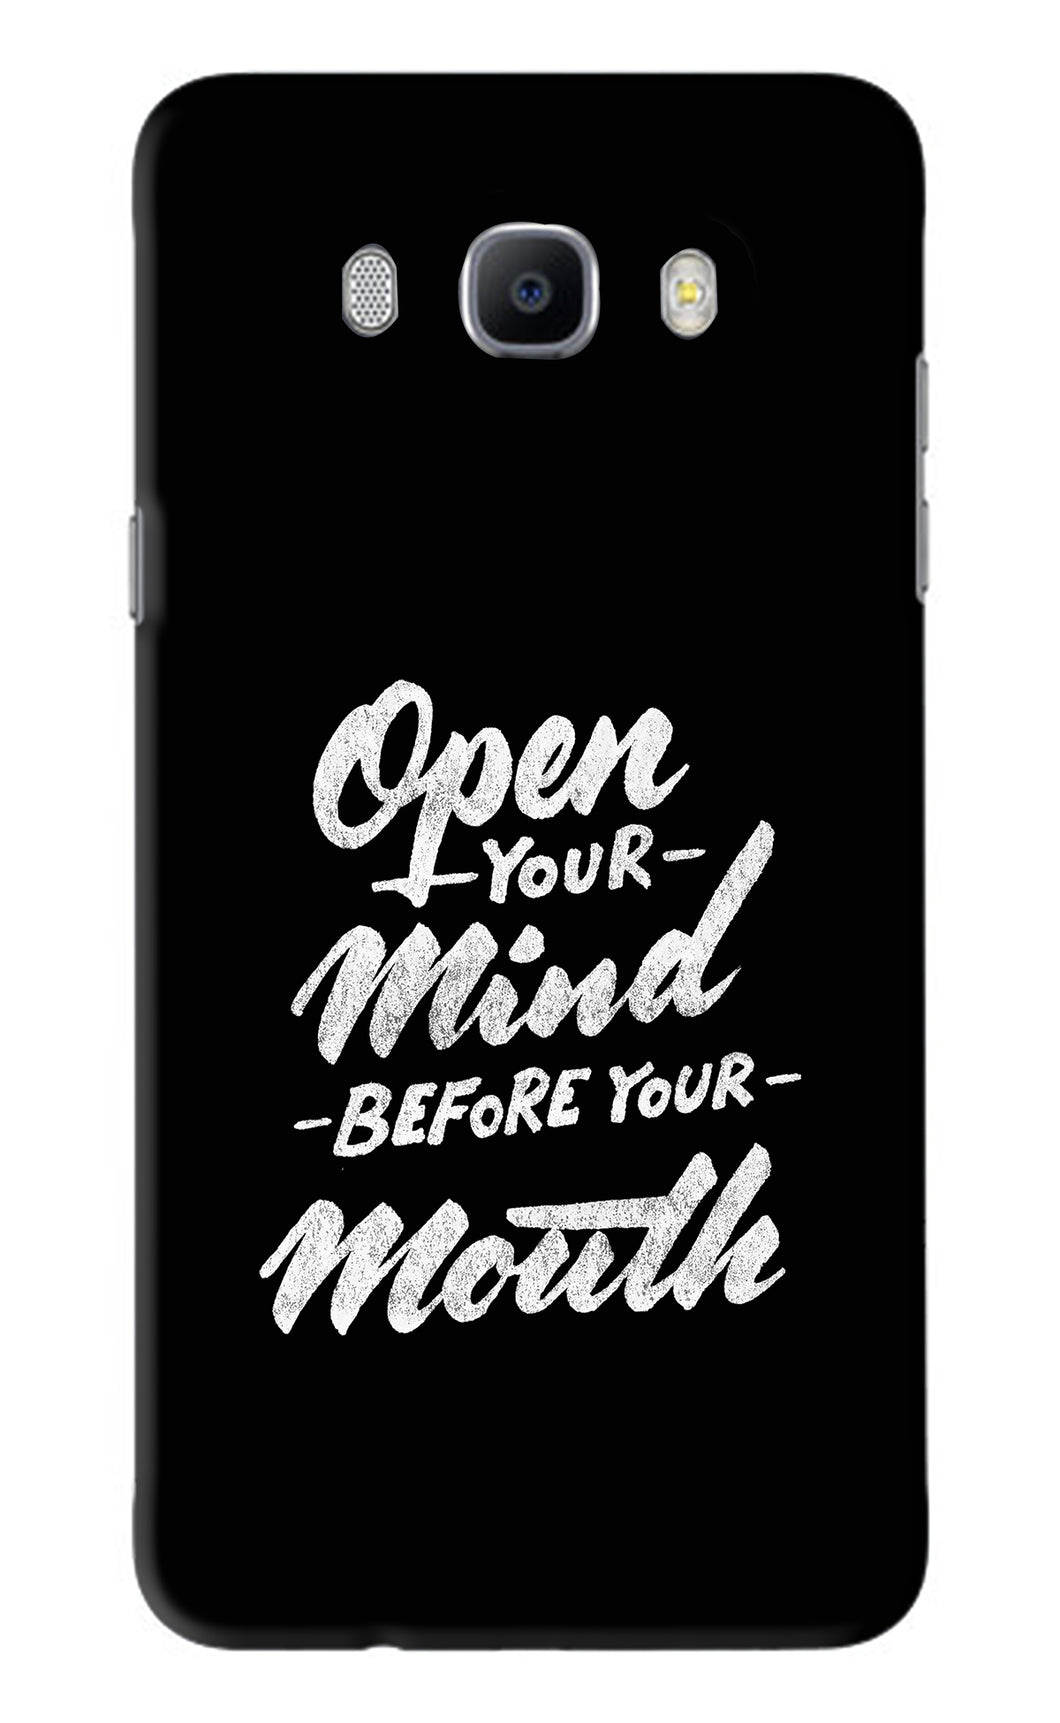 Open Your Mind Before Your Mouth Samsung Galaxy J7 2016 Back Skin Wrap